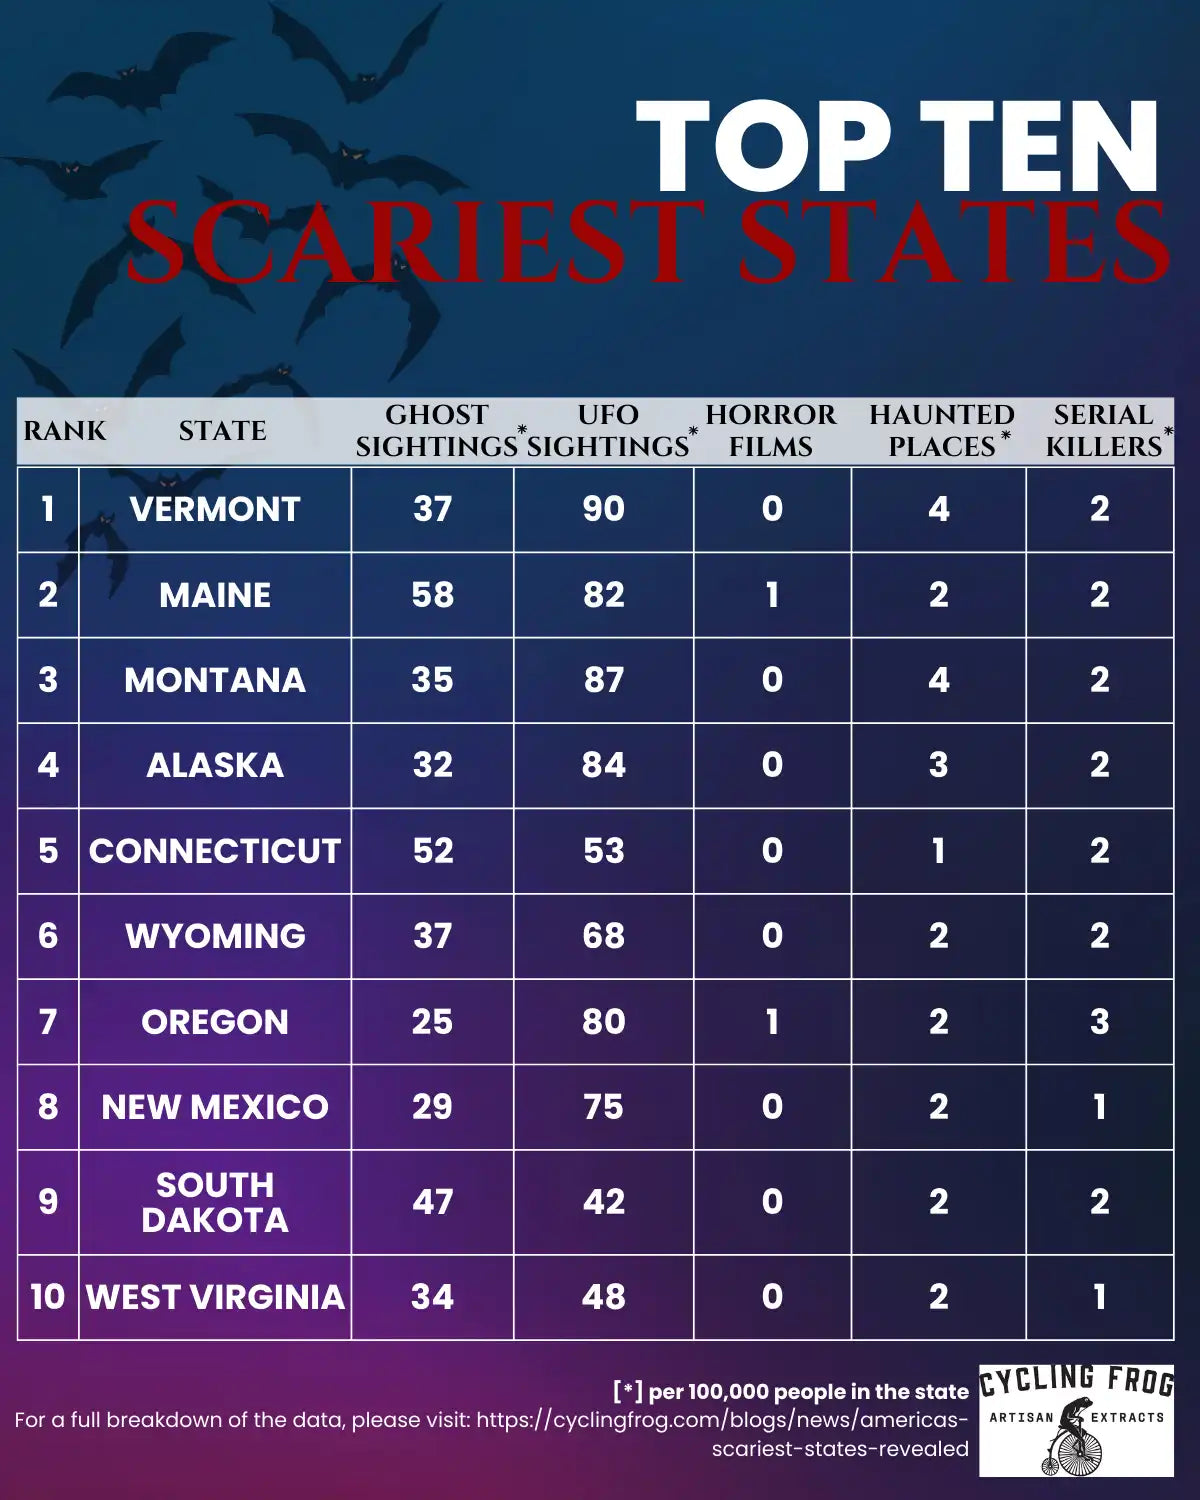 Top 10 scariest states table